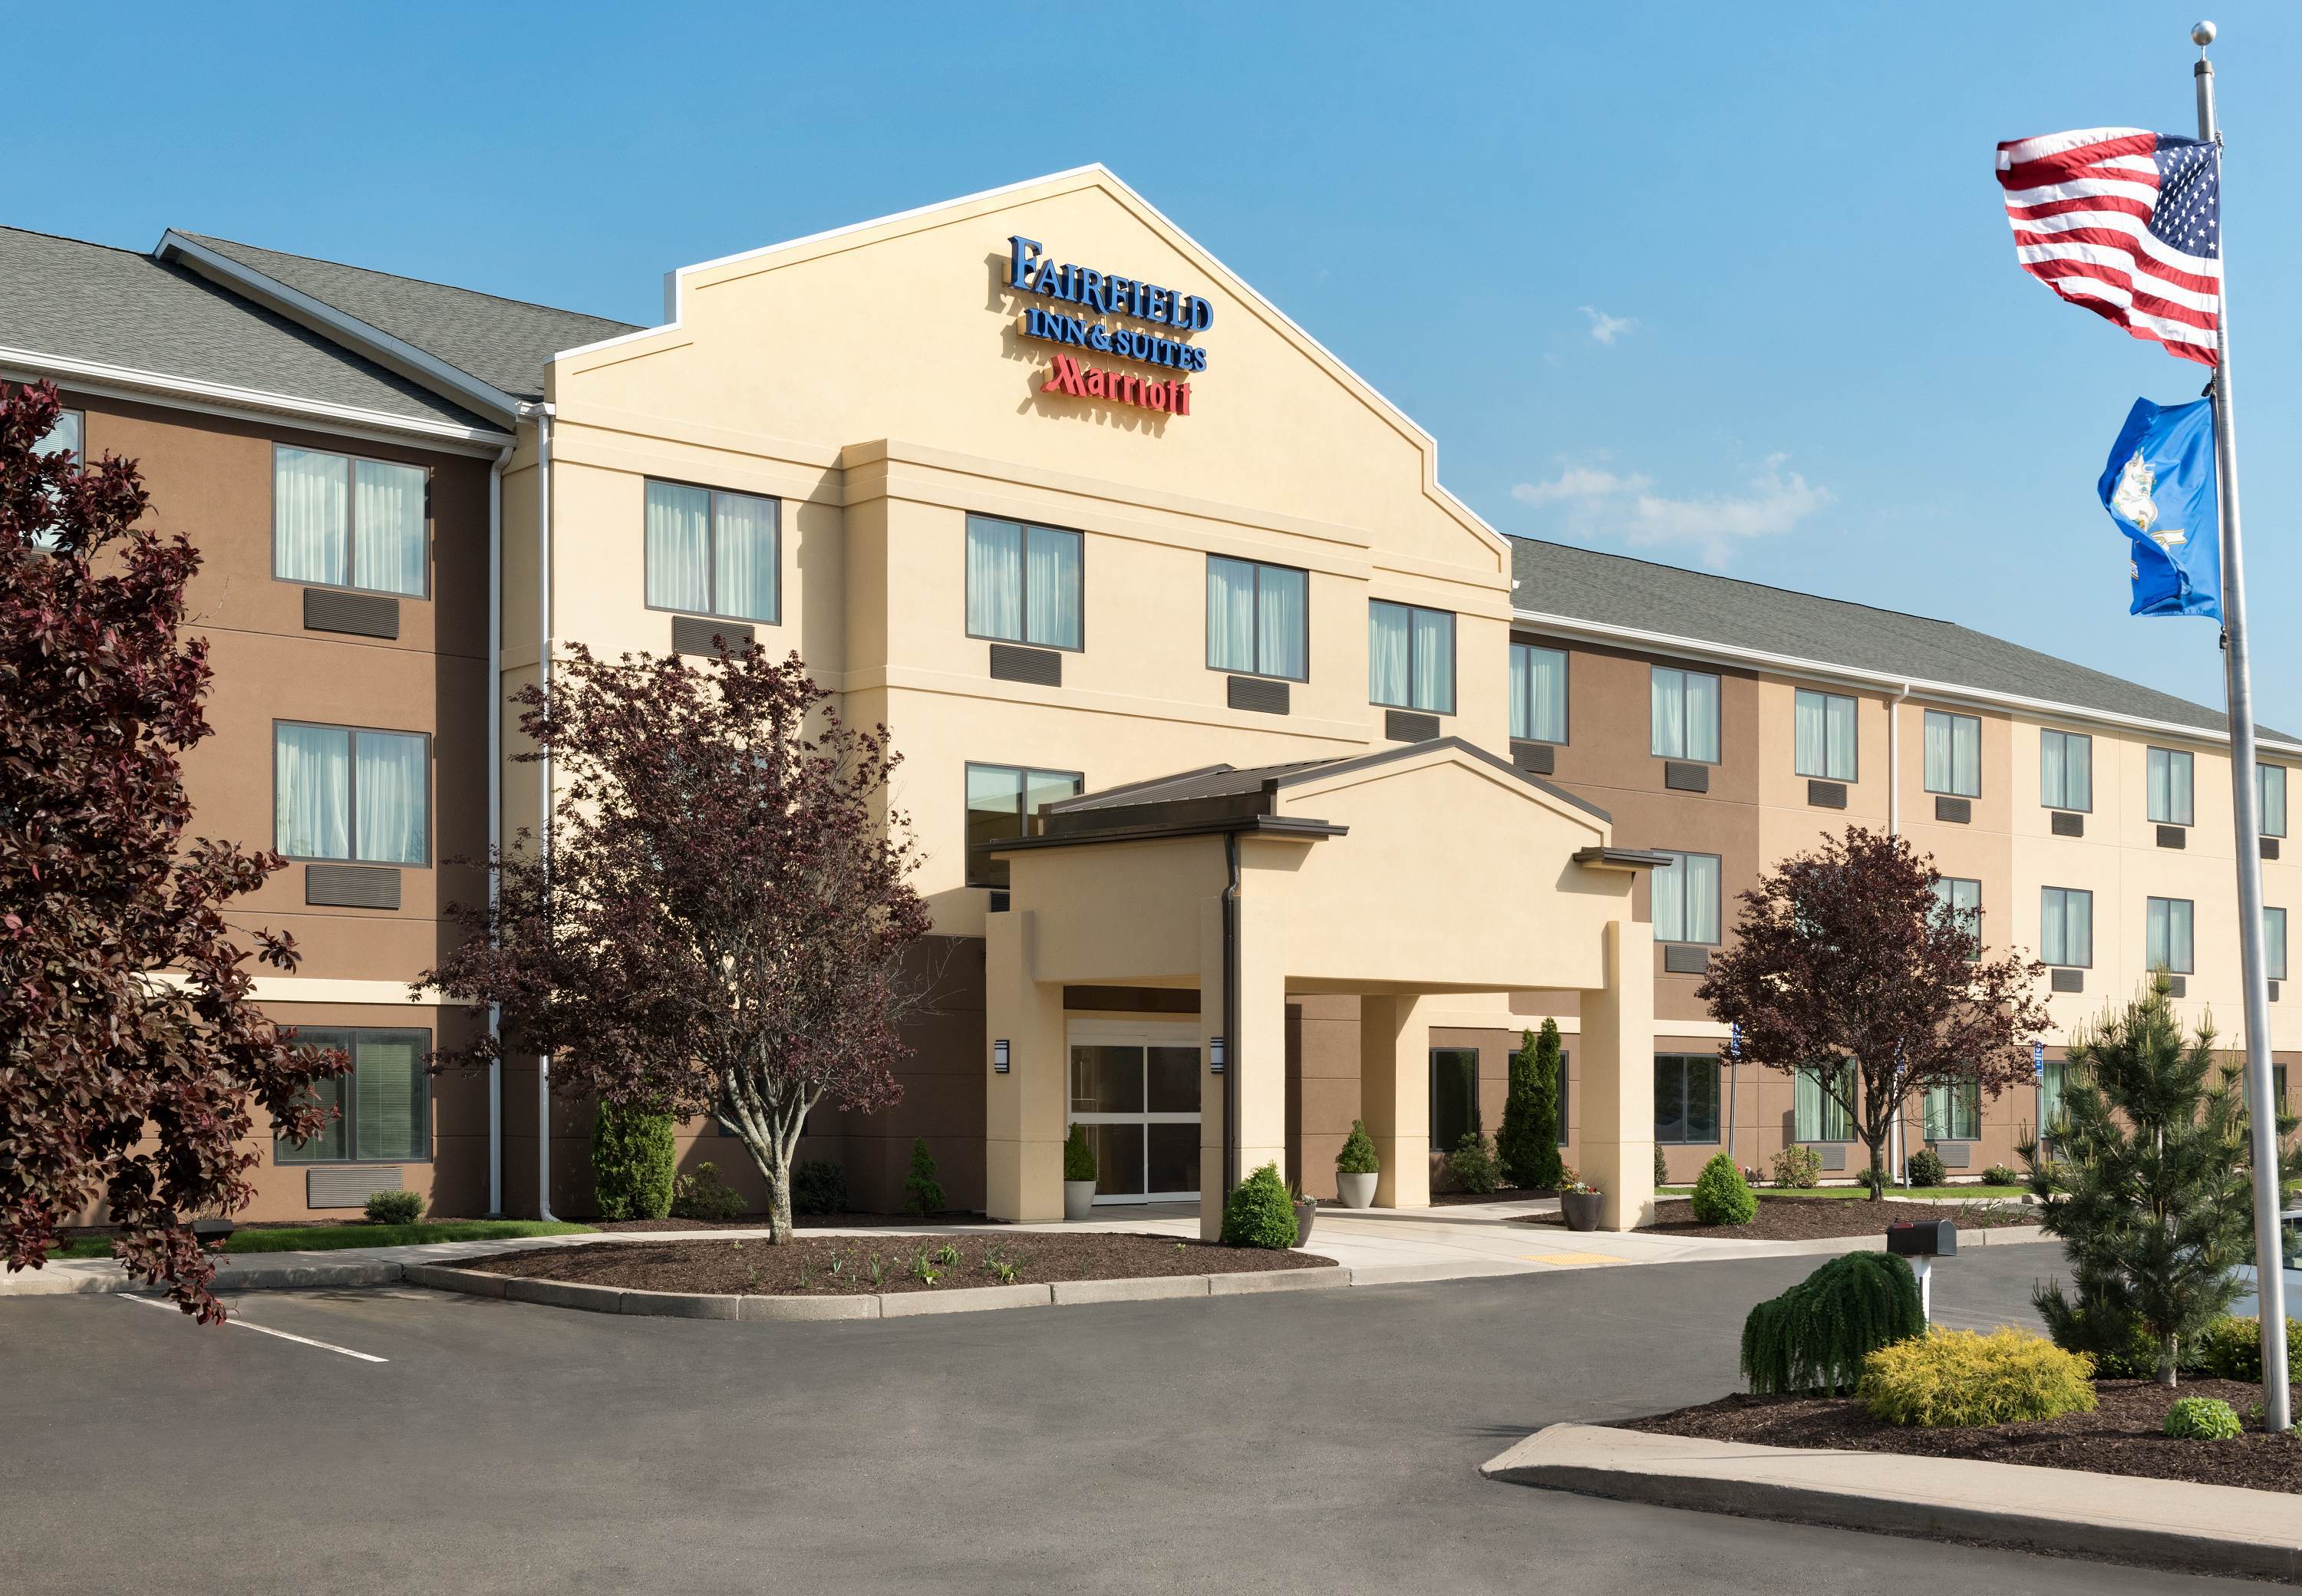 Photo of Fairfield Inn & Suites by Marriott Hartford Manchester, Manchester, CT